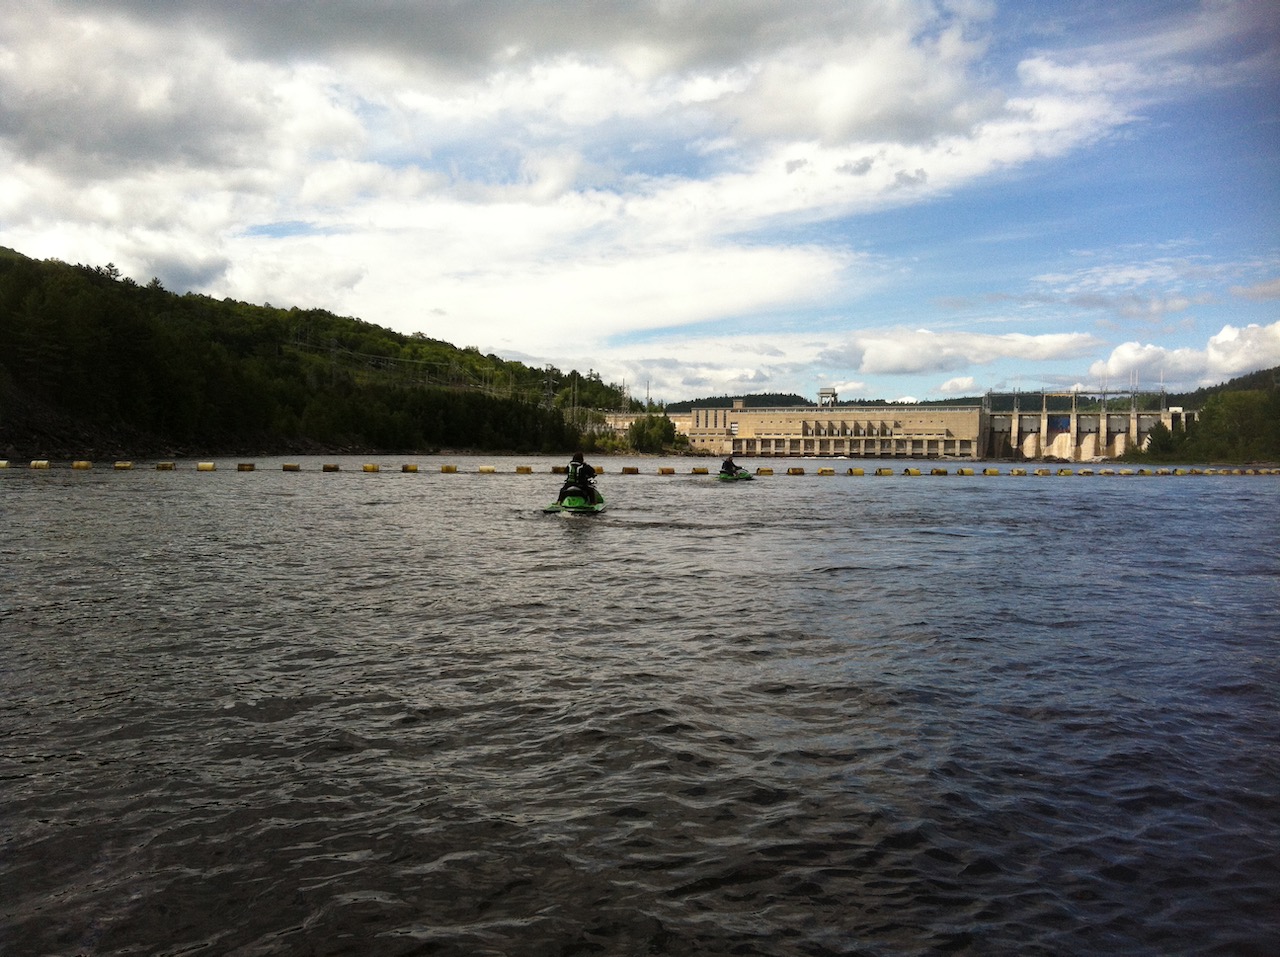 The Upper Ottawa River ride is blocked by several massive dams like this one at Mattawa.